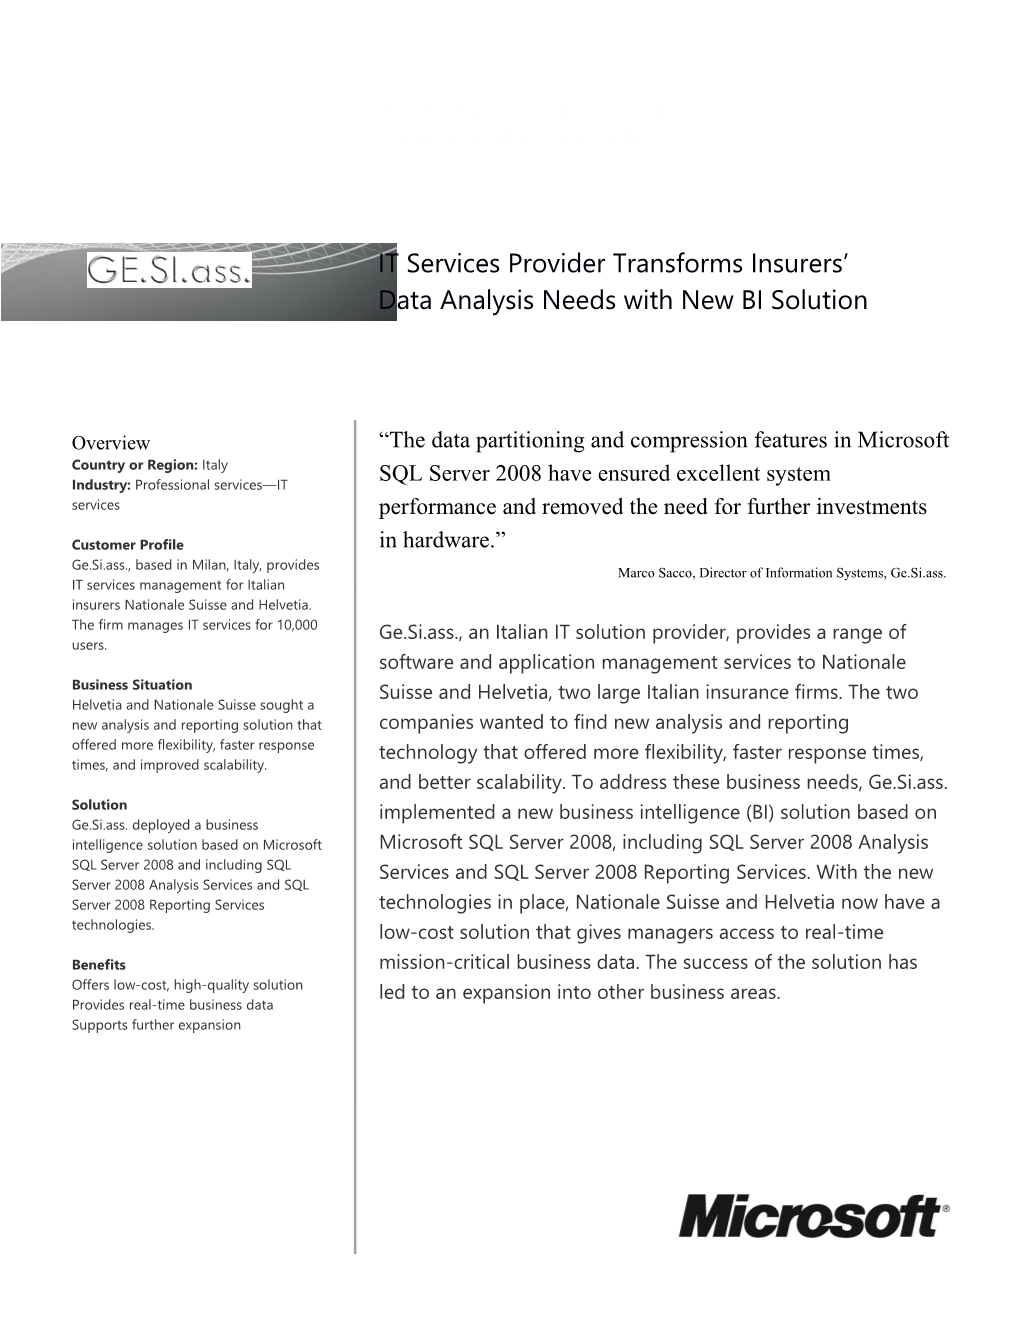 IT Services Provider Transforms Insurers Data Analysis Needs with New BI Solution